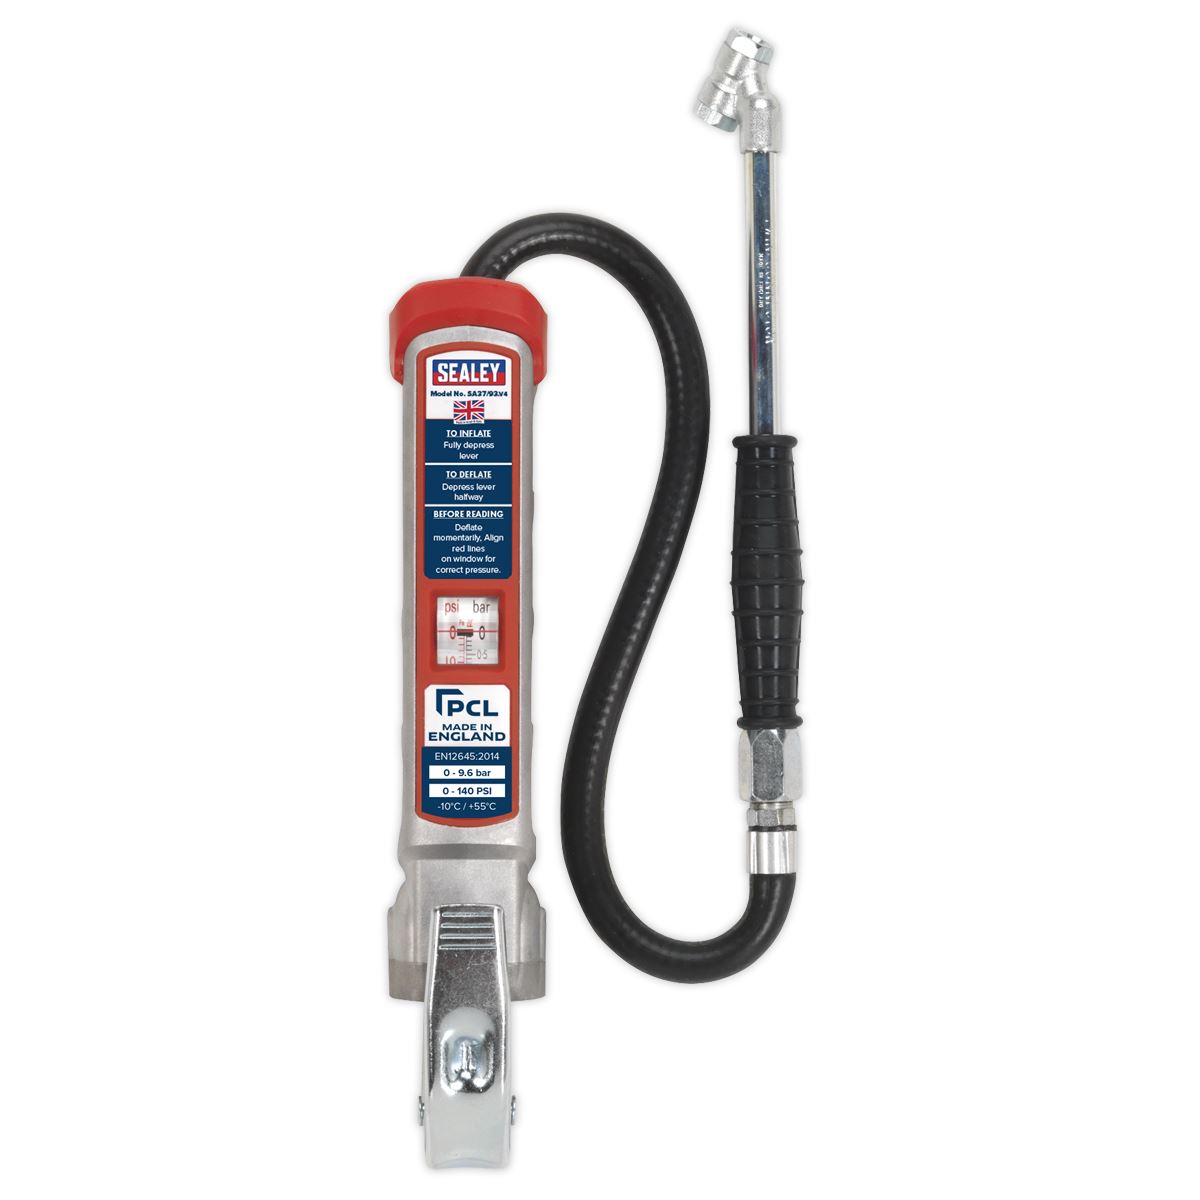 PCL Professional Tyre Inflator with Twin Push-On Connector